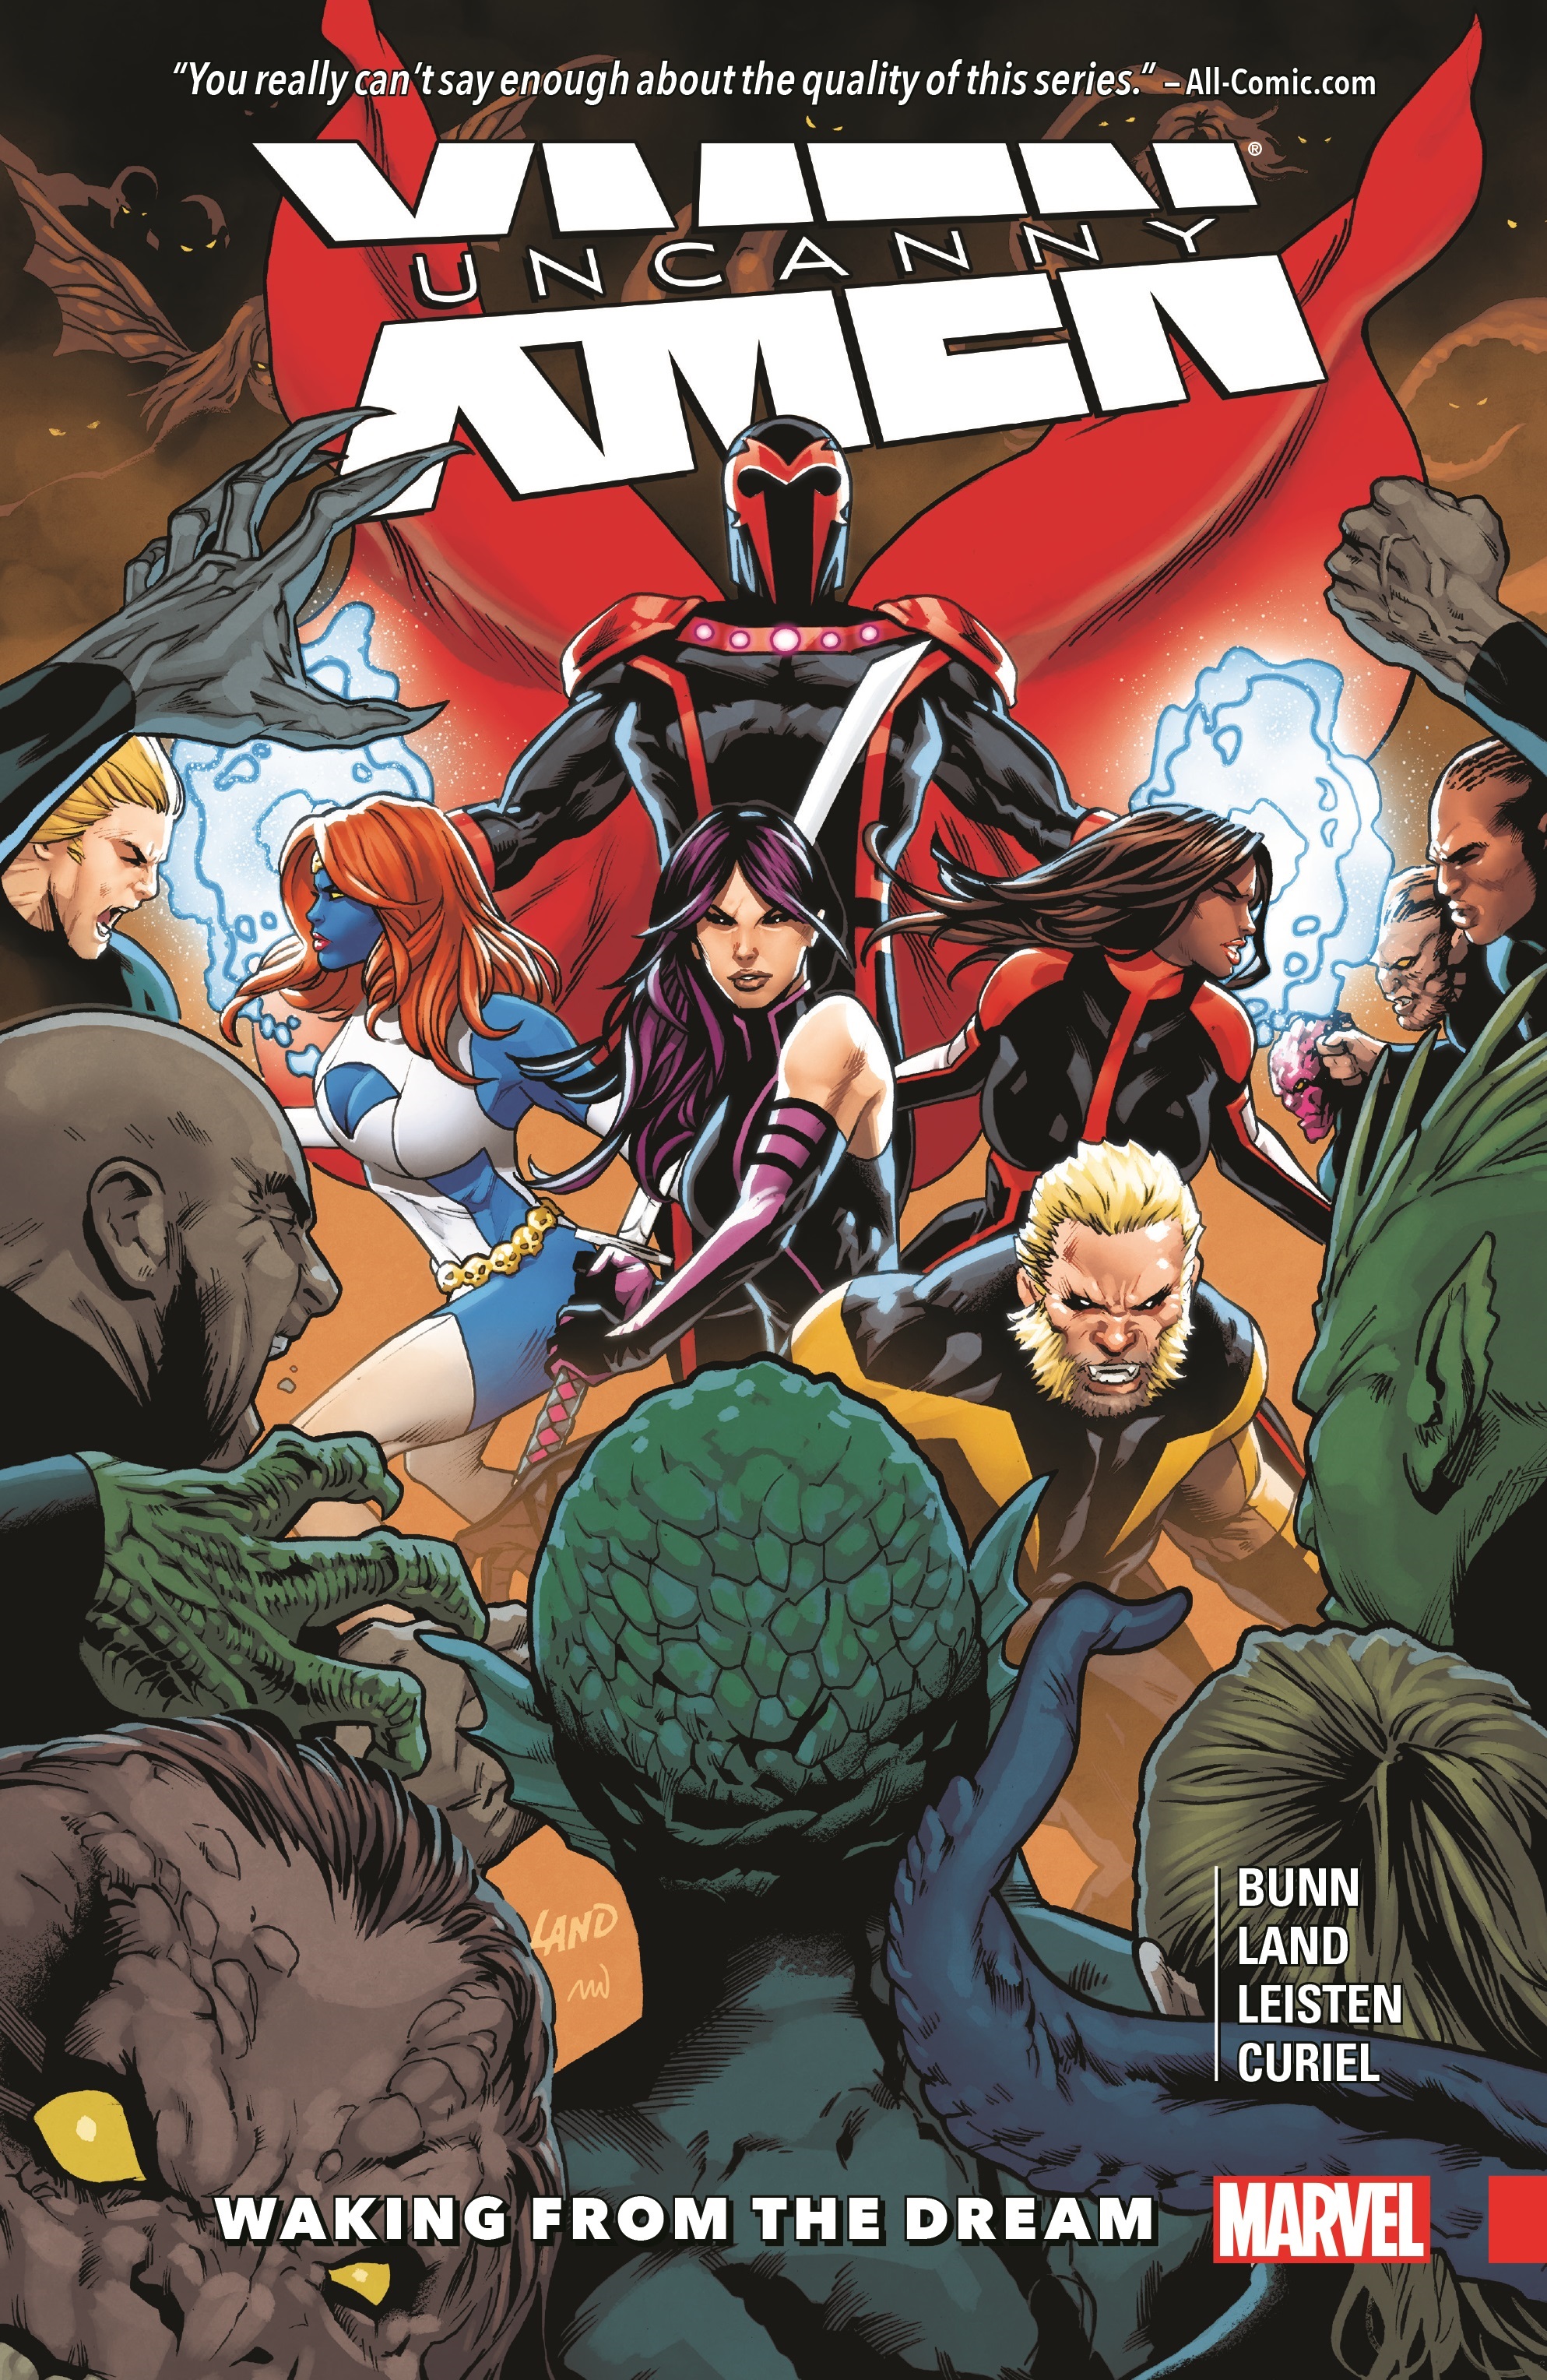 Uncanny X-Men: Superior Vol. 3 - Waking from The Dream (Trade Paperback)